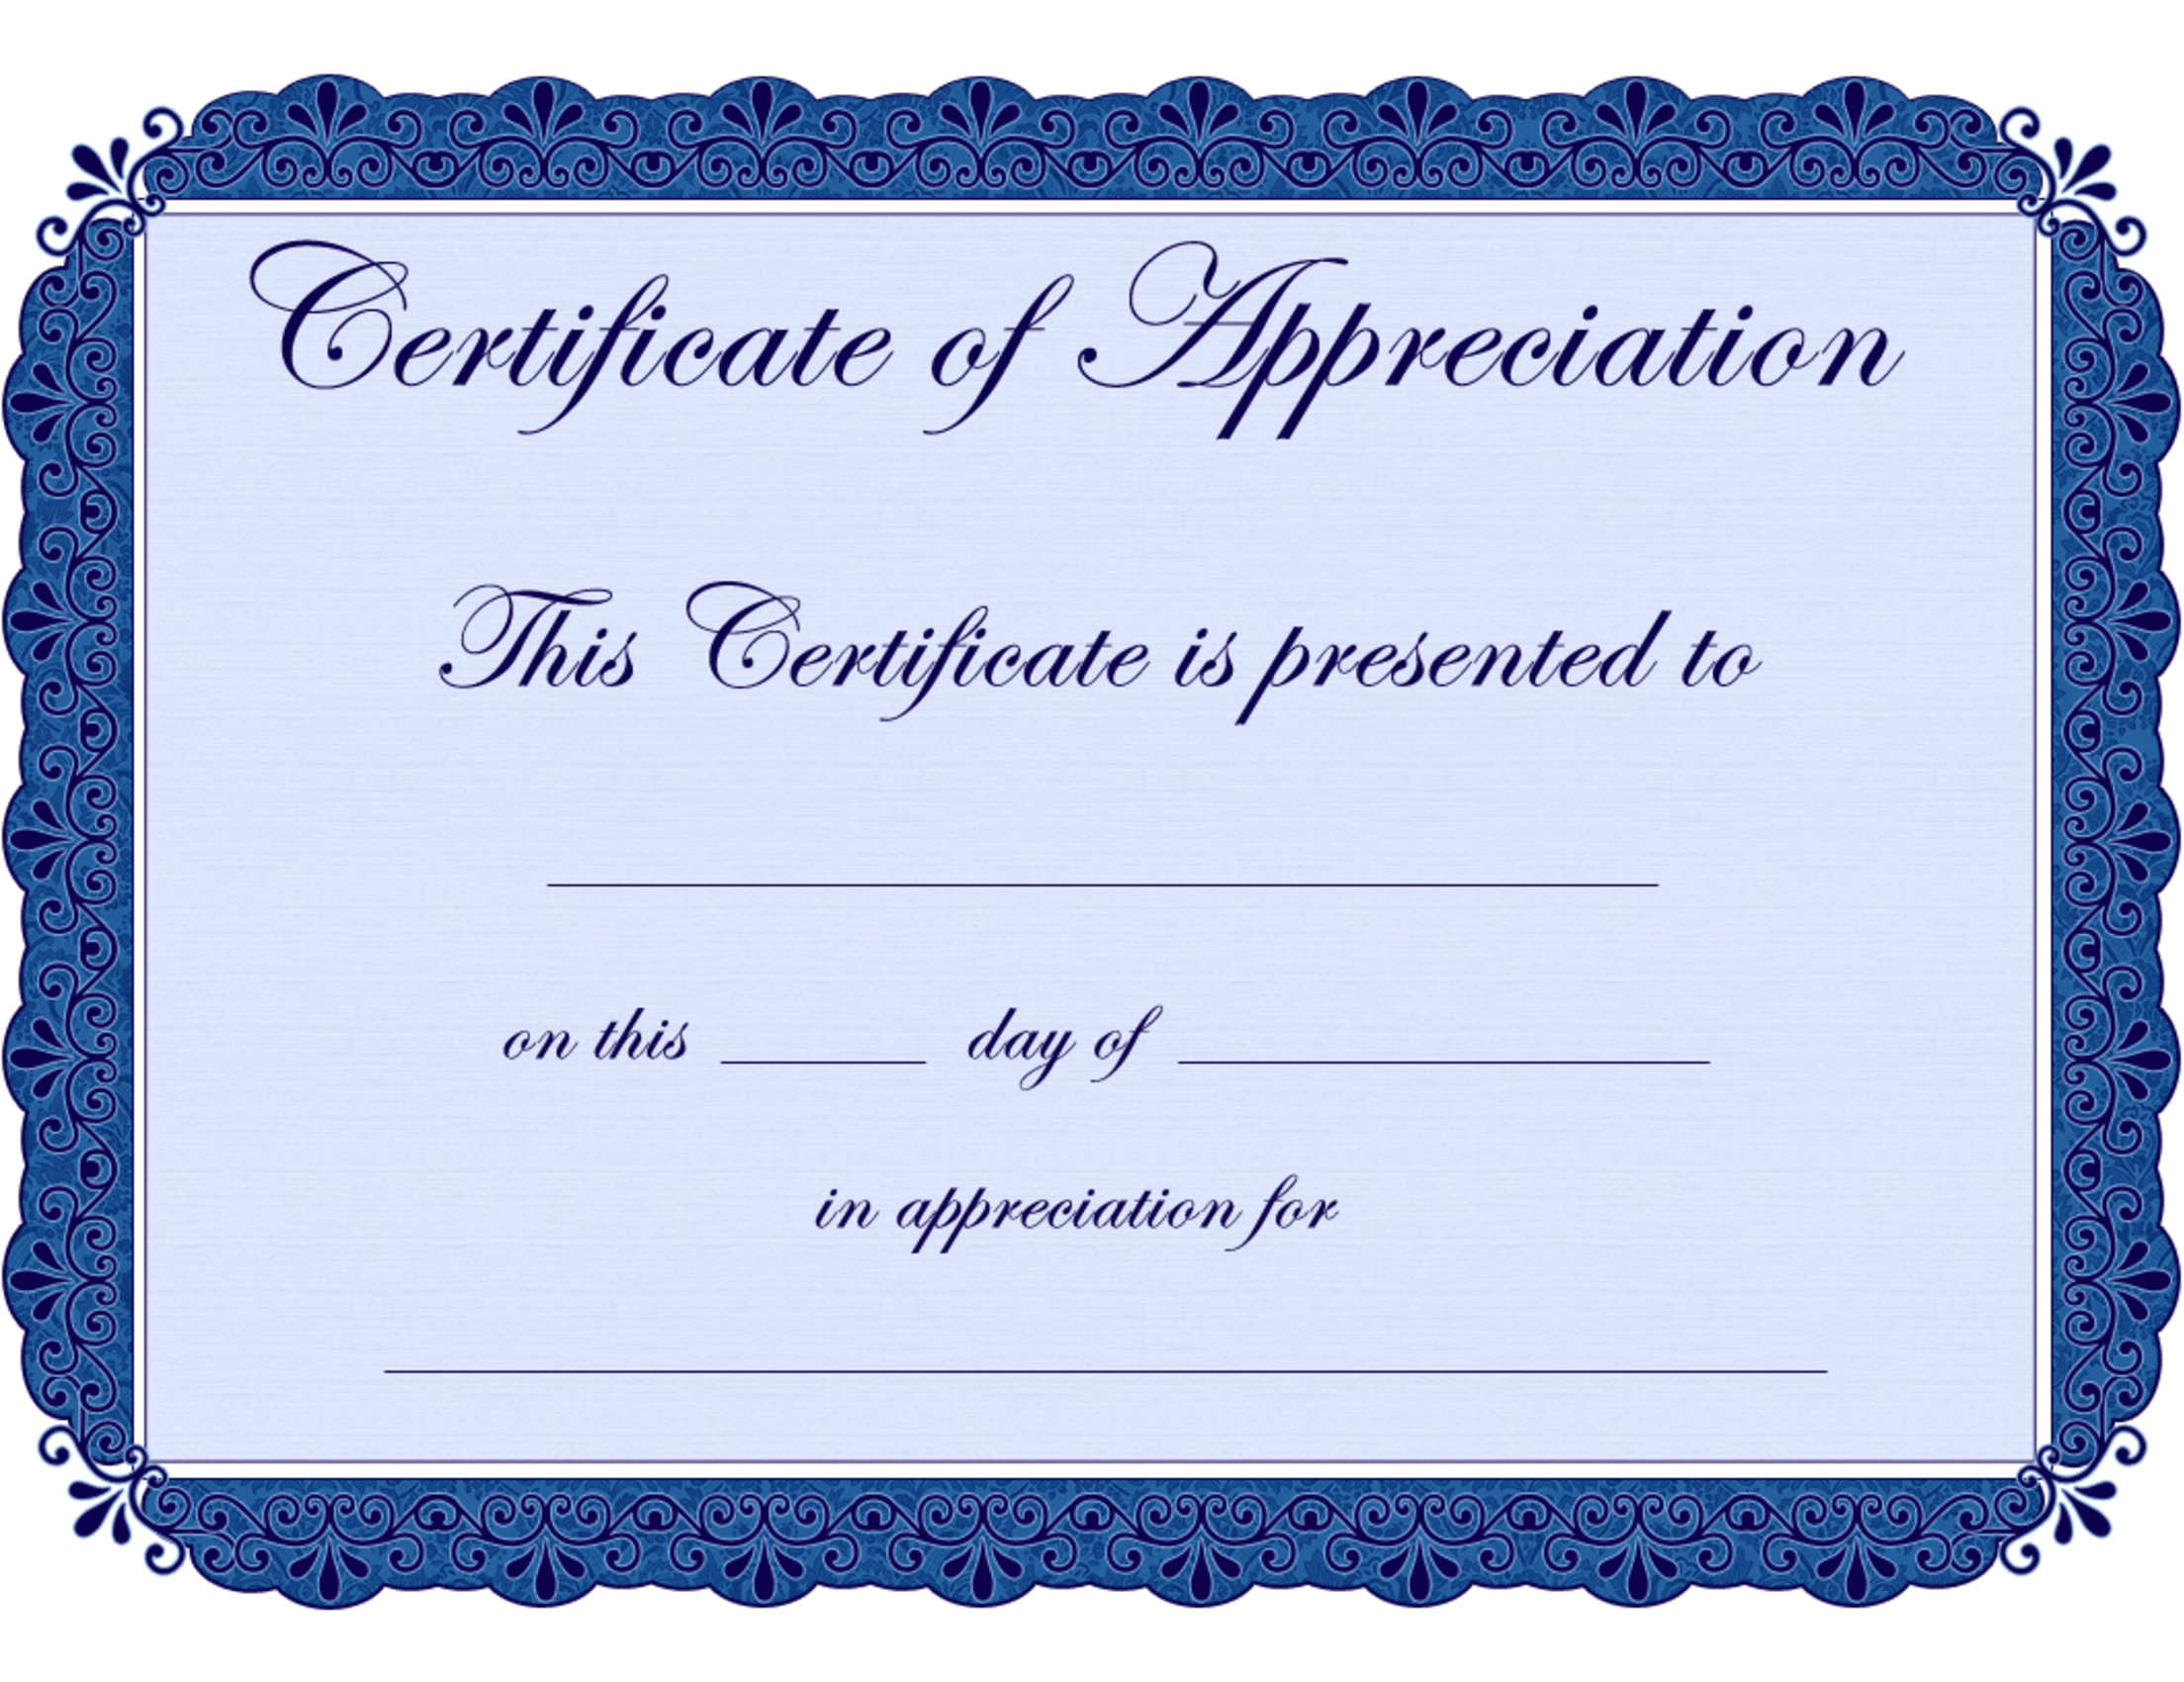 Free Printable Certificates Certificate Of Appreciation Certificate - Free Printable Certificates Of Achievement